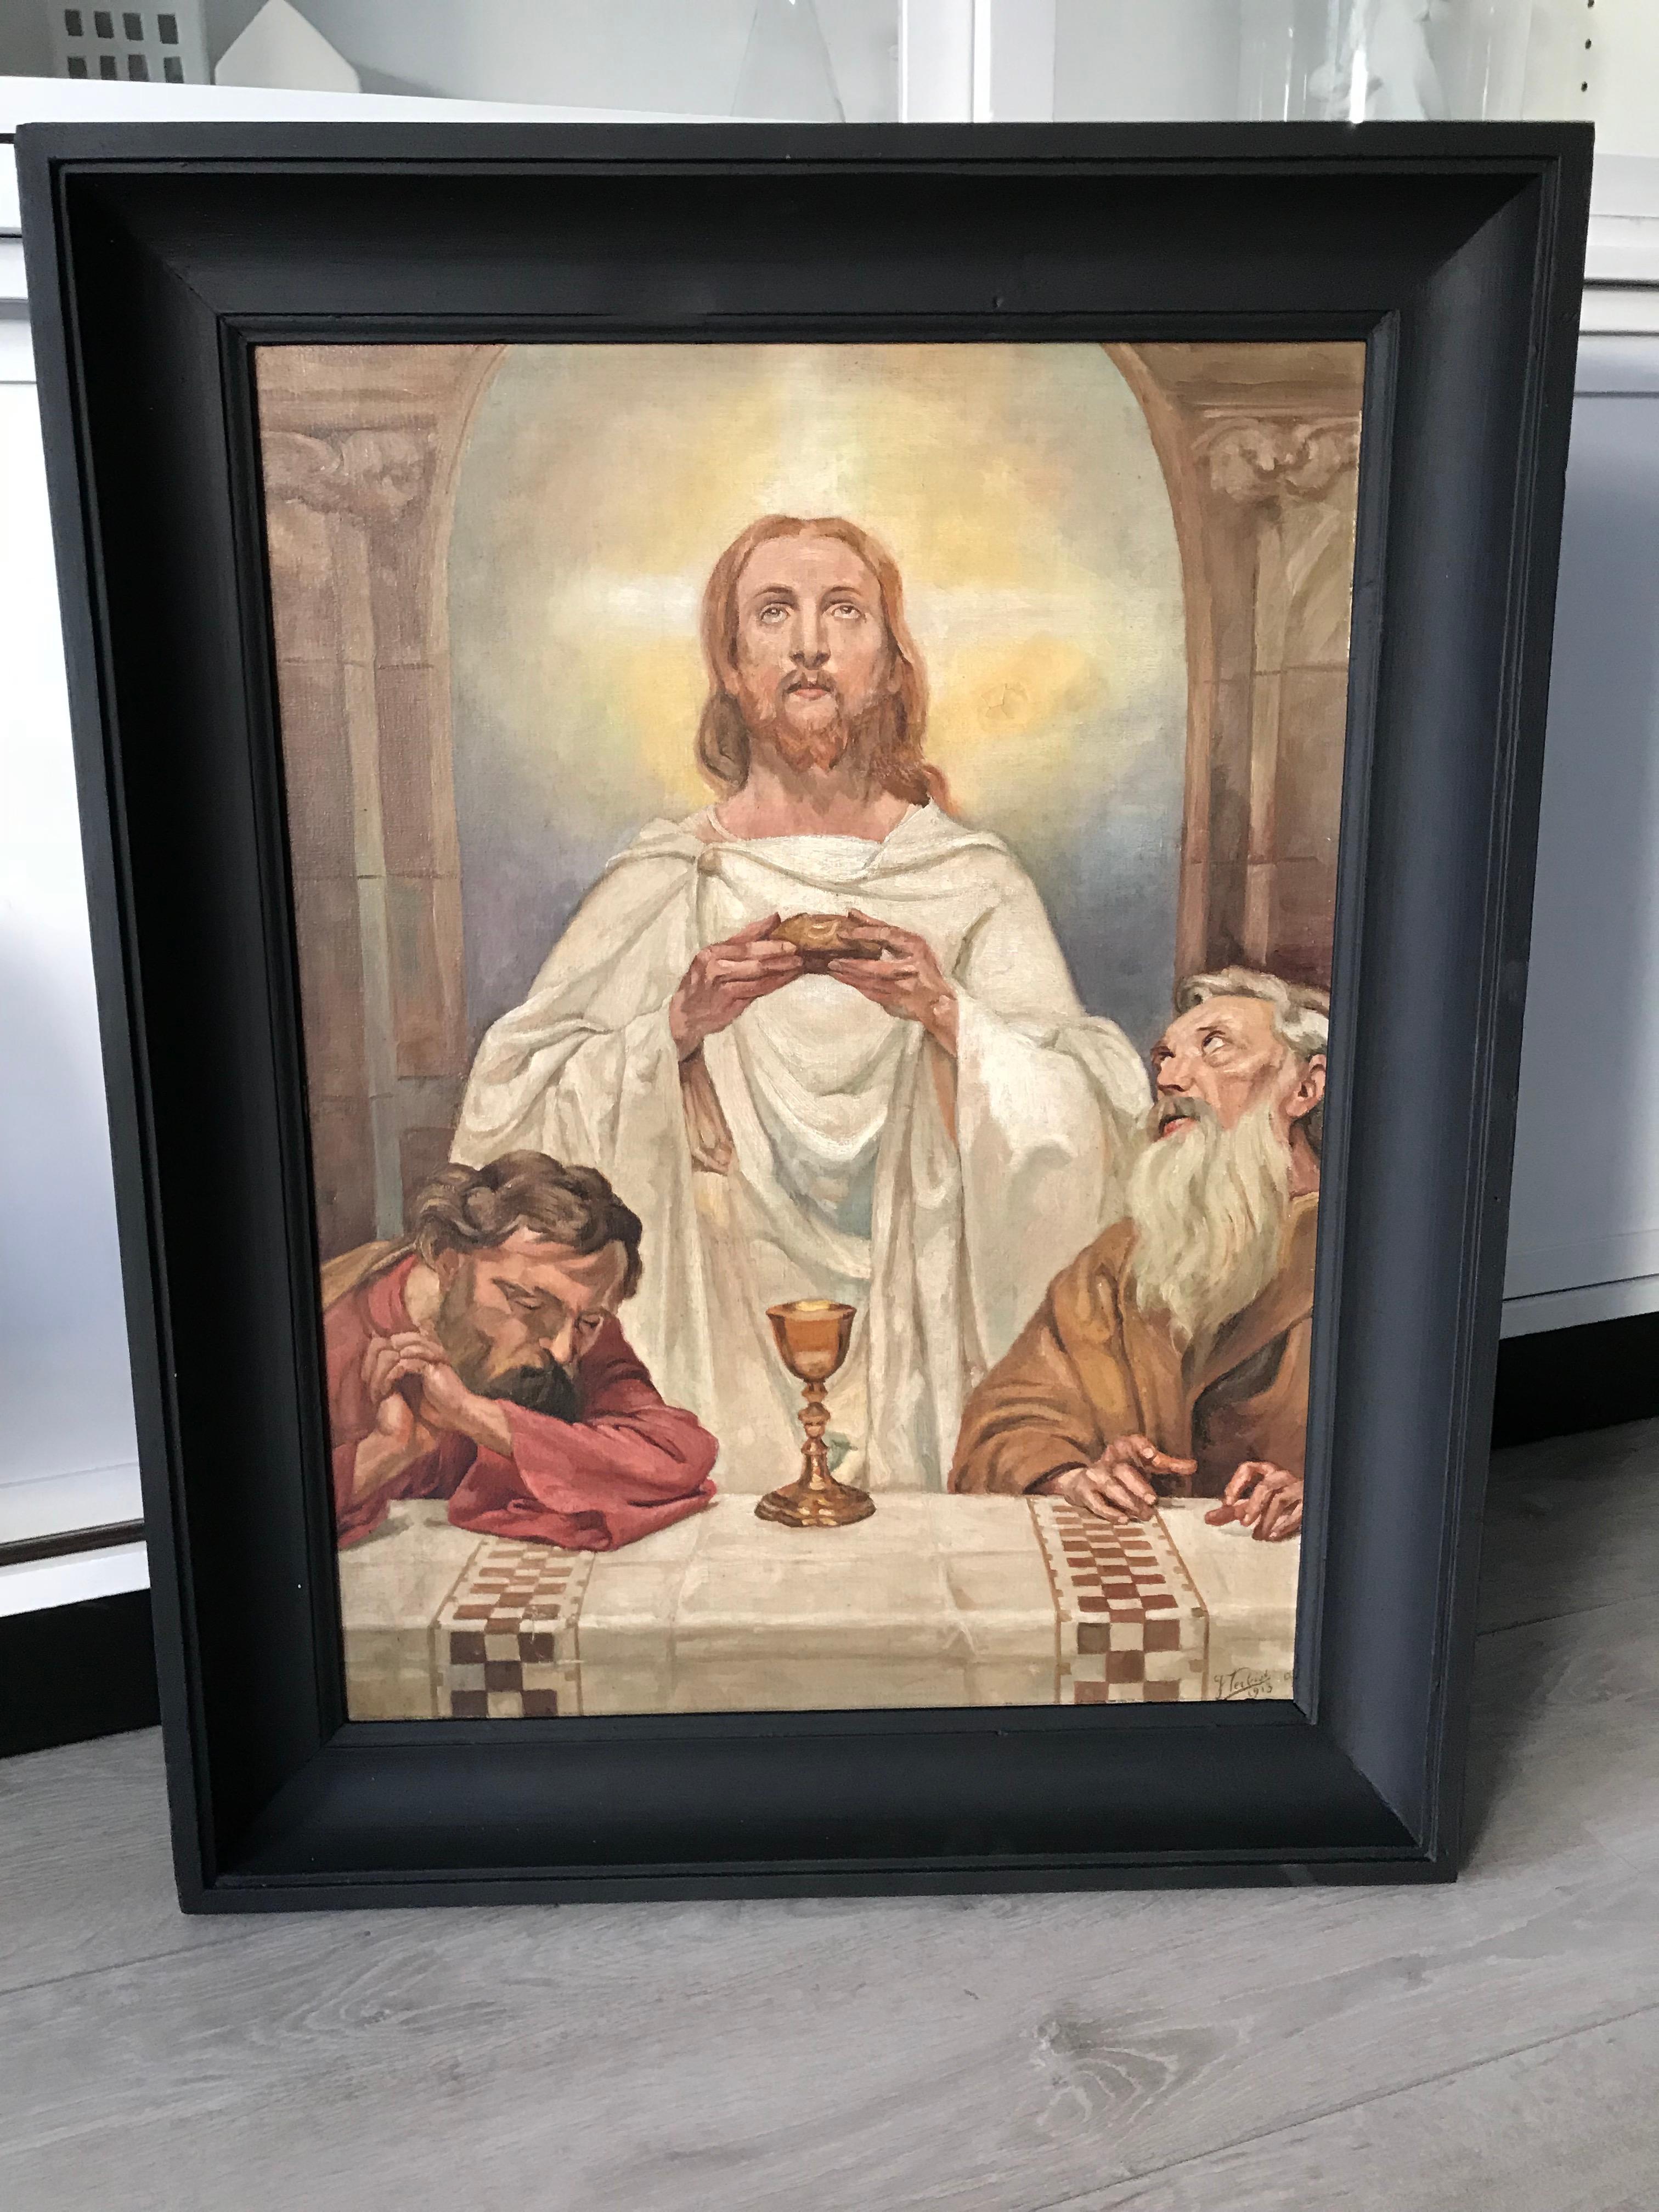 Meaningful and perfect size, religious work of art.

We find it refreshing to see Christ in this original 1913 oil painting as the spiritual master that he was (in a ceremonial act) and not suffering. Those other works of art can certainly be